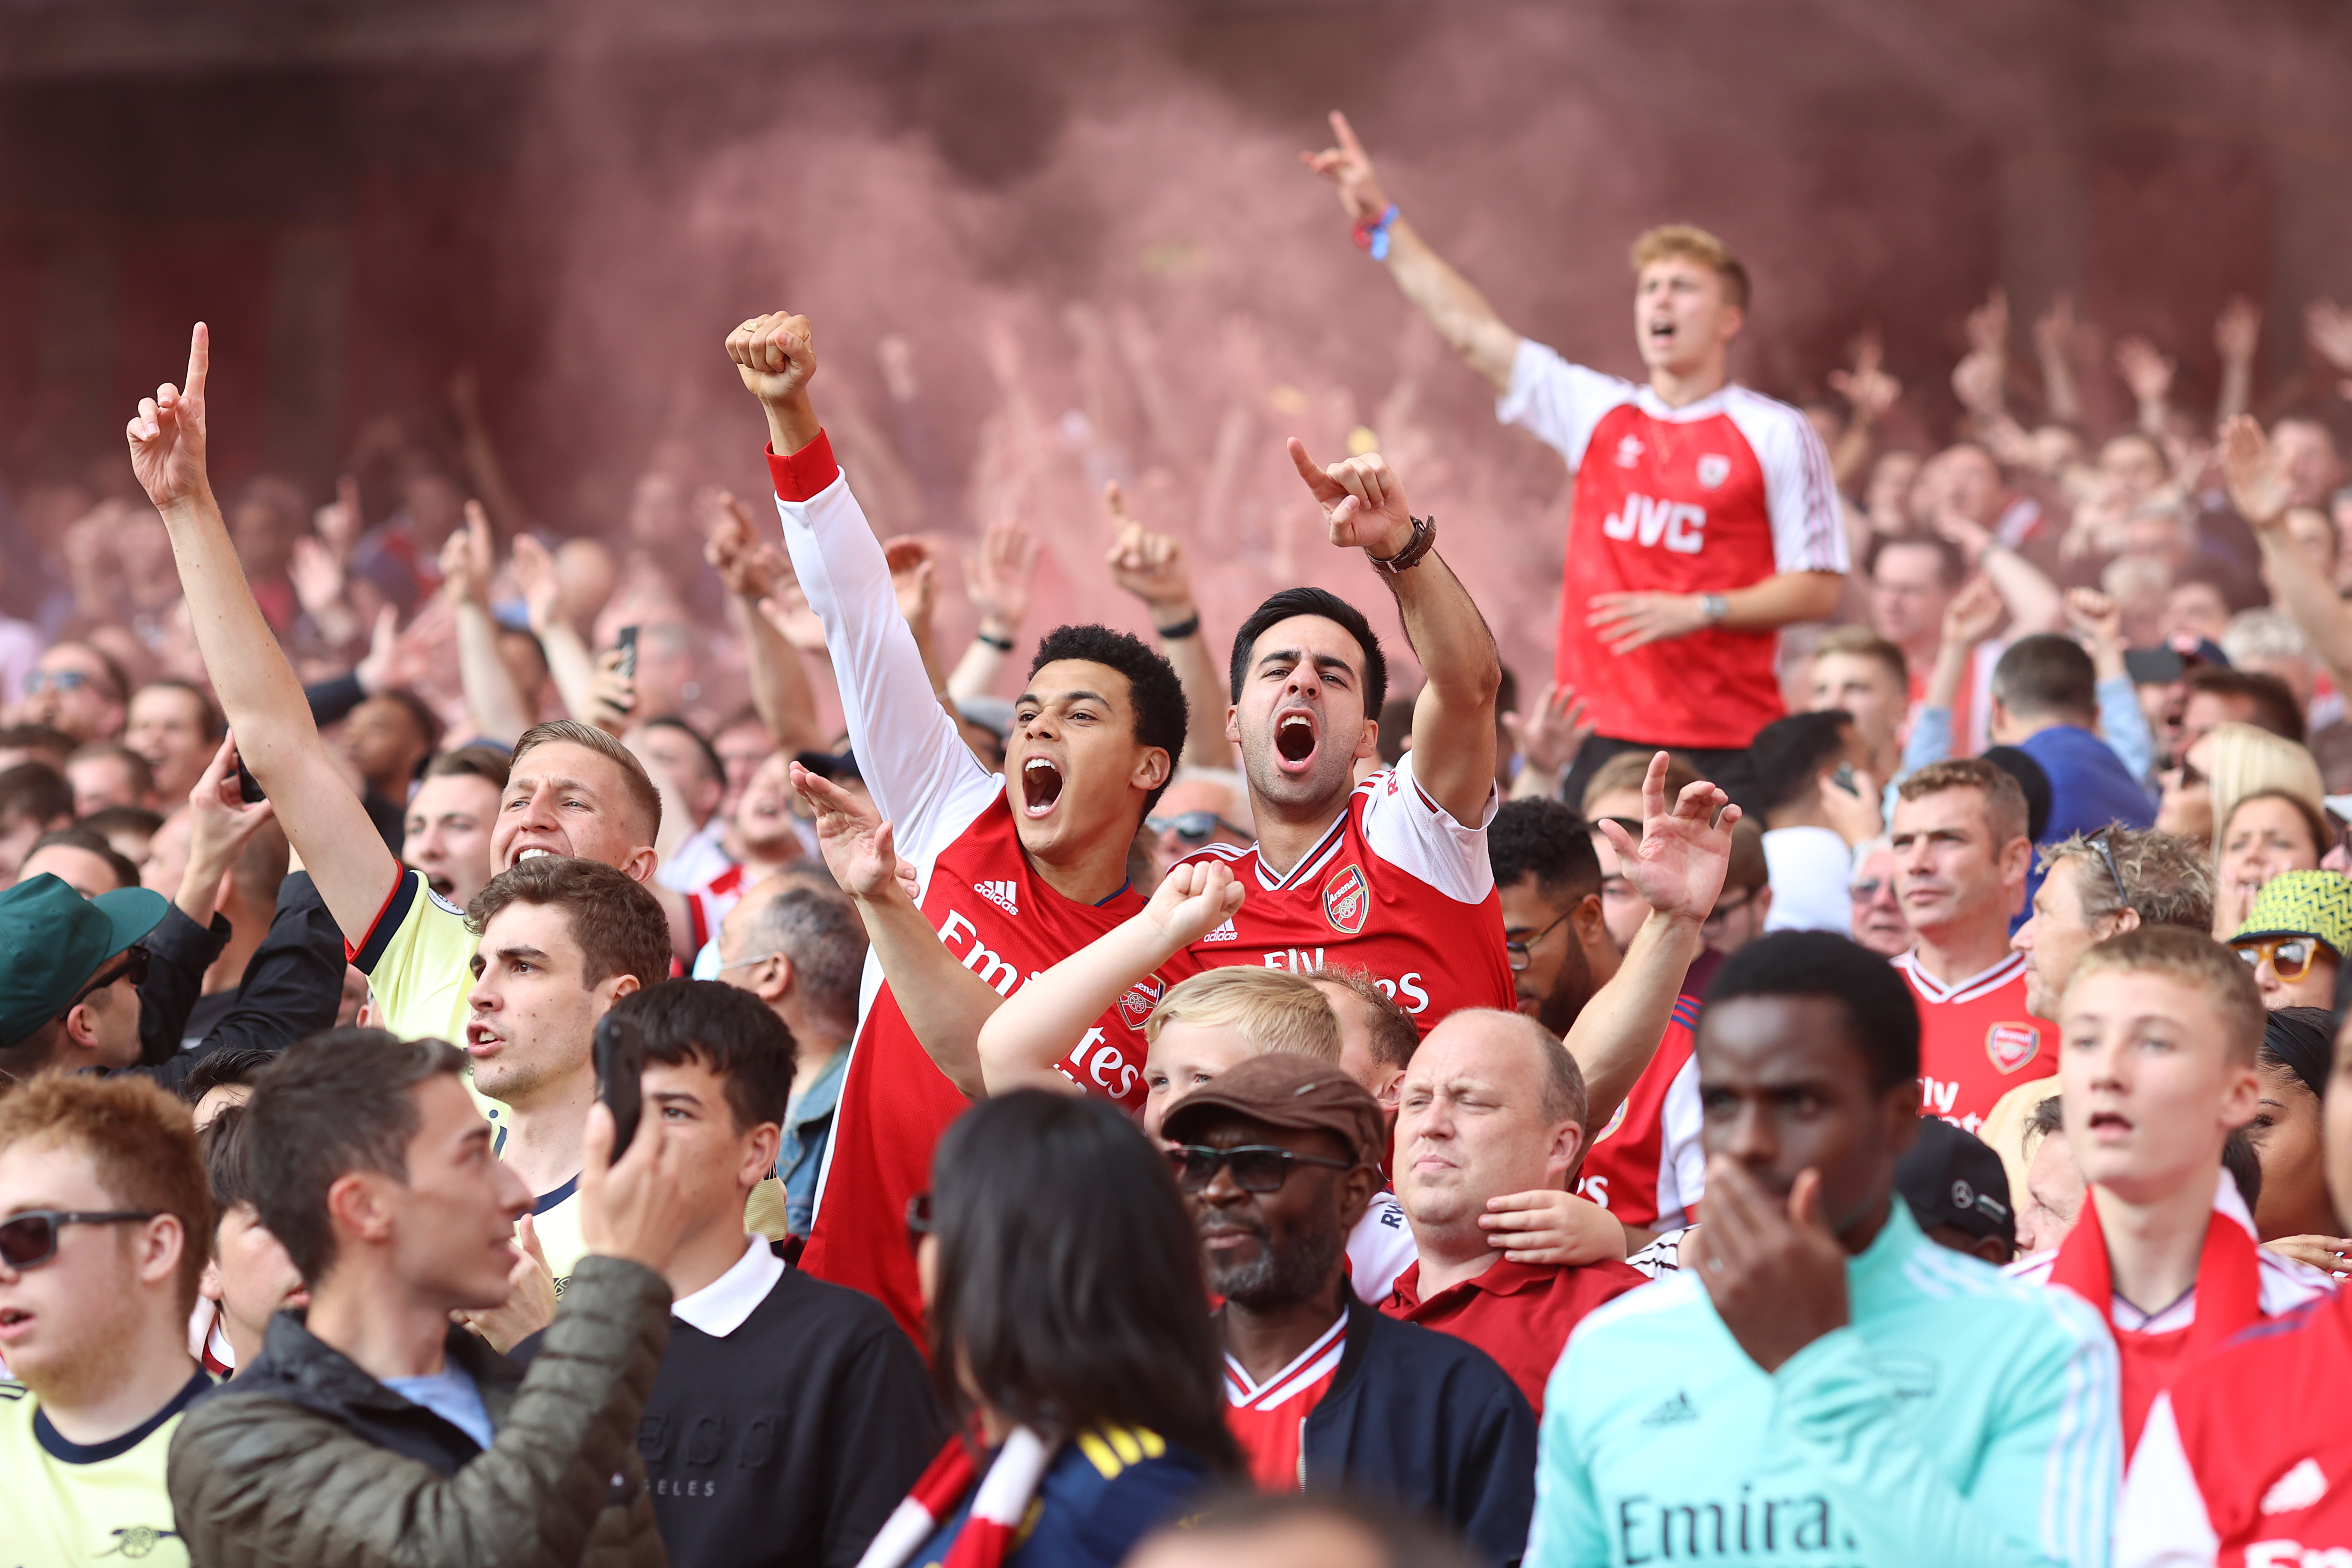 In praise of the tremendous backing for Mikel Arteta's Gunners shown by loyal Arsenal supporters this season as North London derby looms